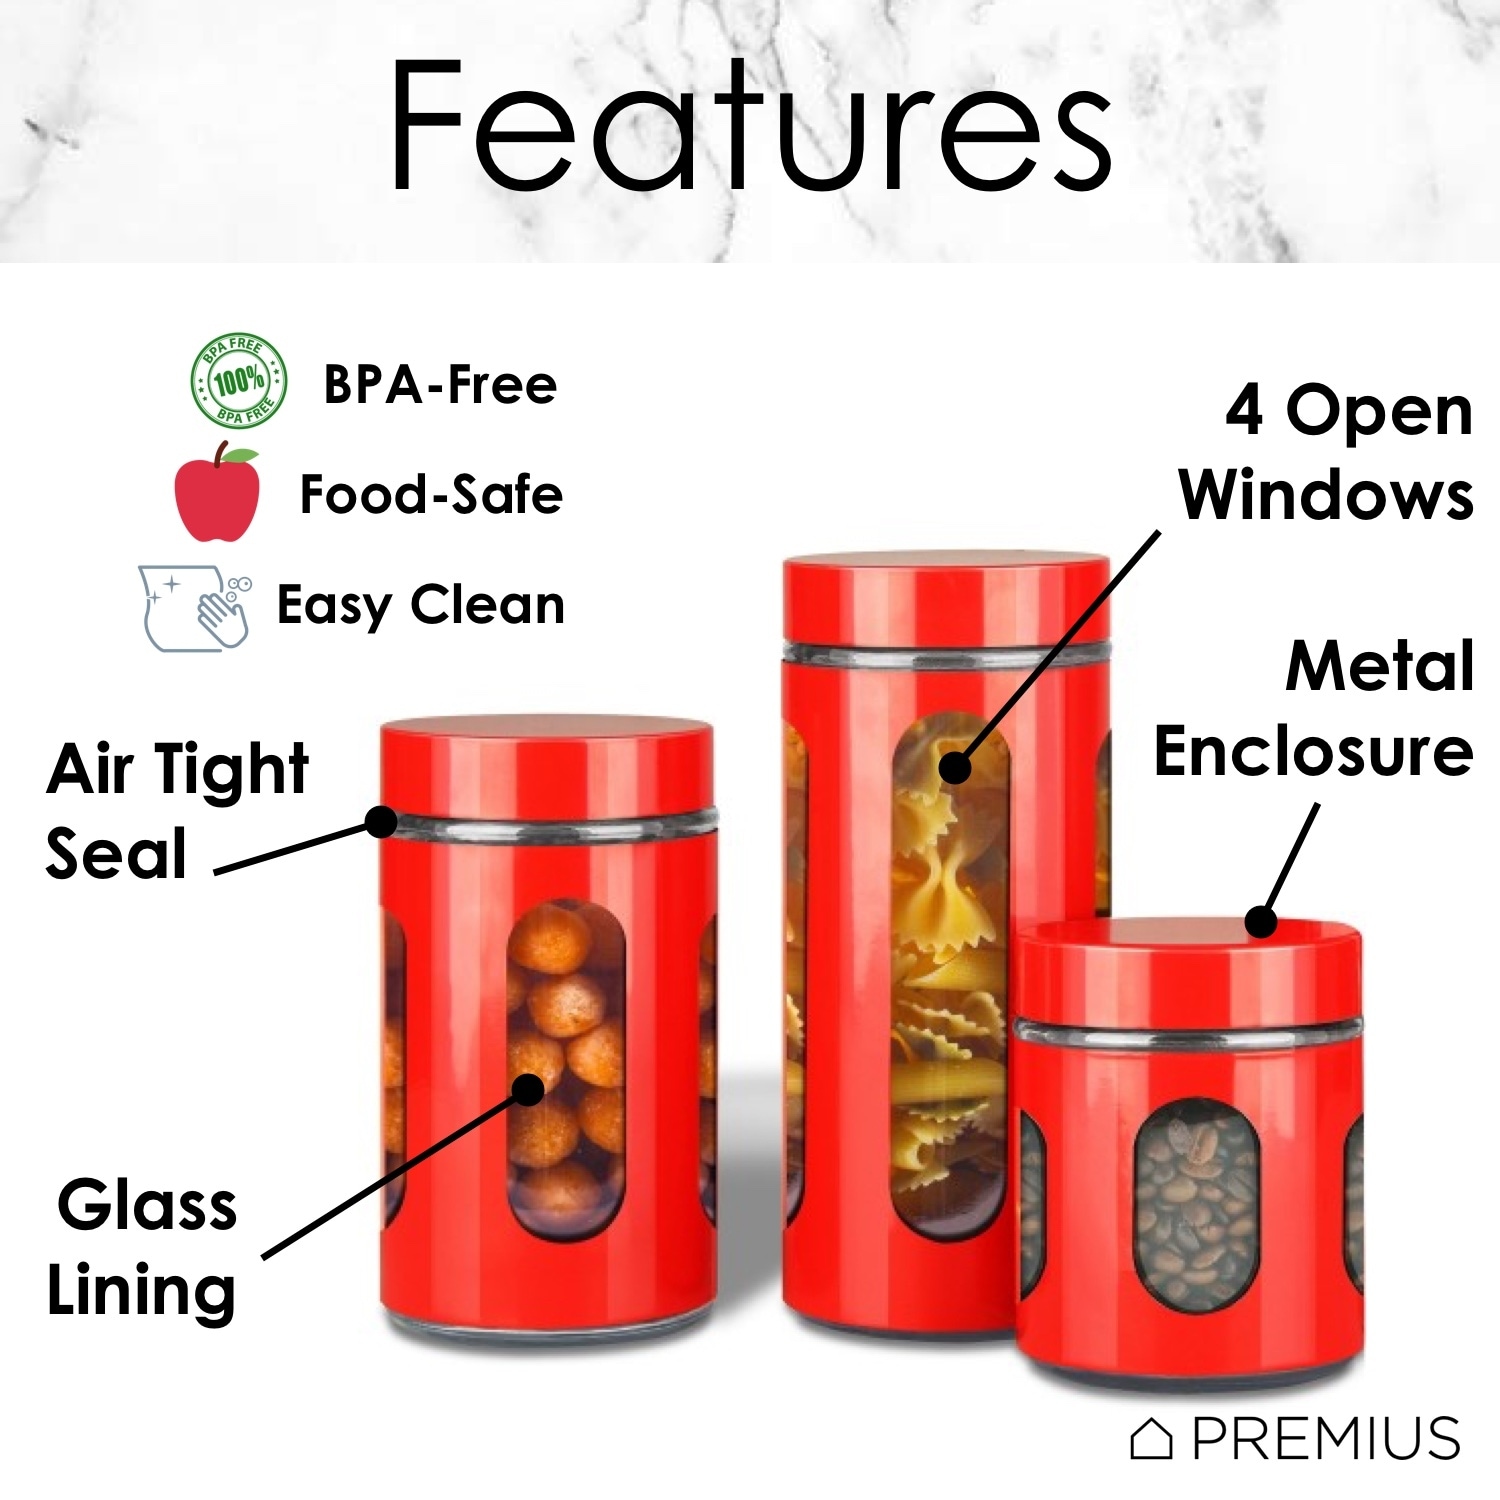 https://ak1.ostkcdn.com/images/products/is/images/direct/374504ad5d561a454a8095d71dc10cdfcdef4fec/Premius-Airtight-3-Piece-Kitchen-Glass-Canister-Set.jpg